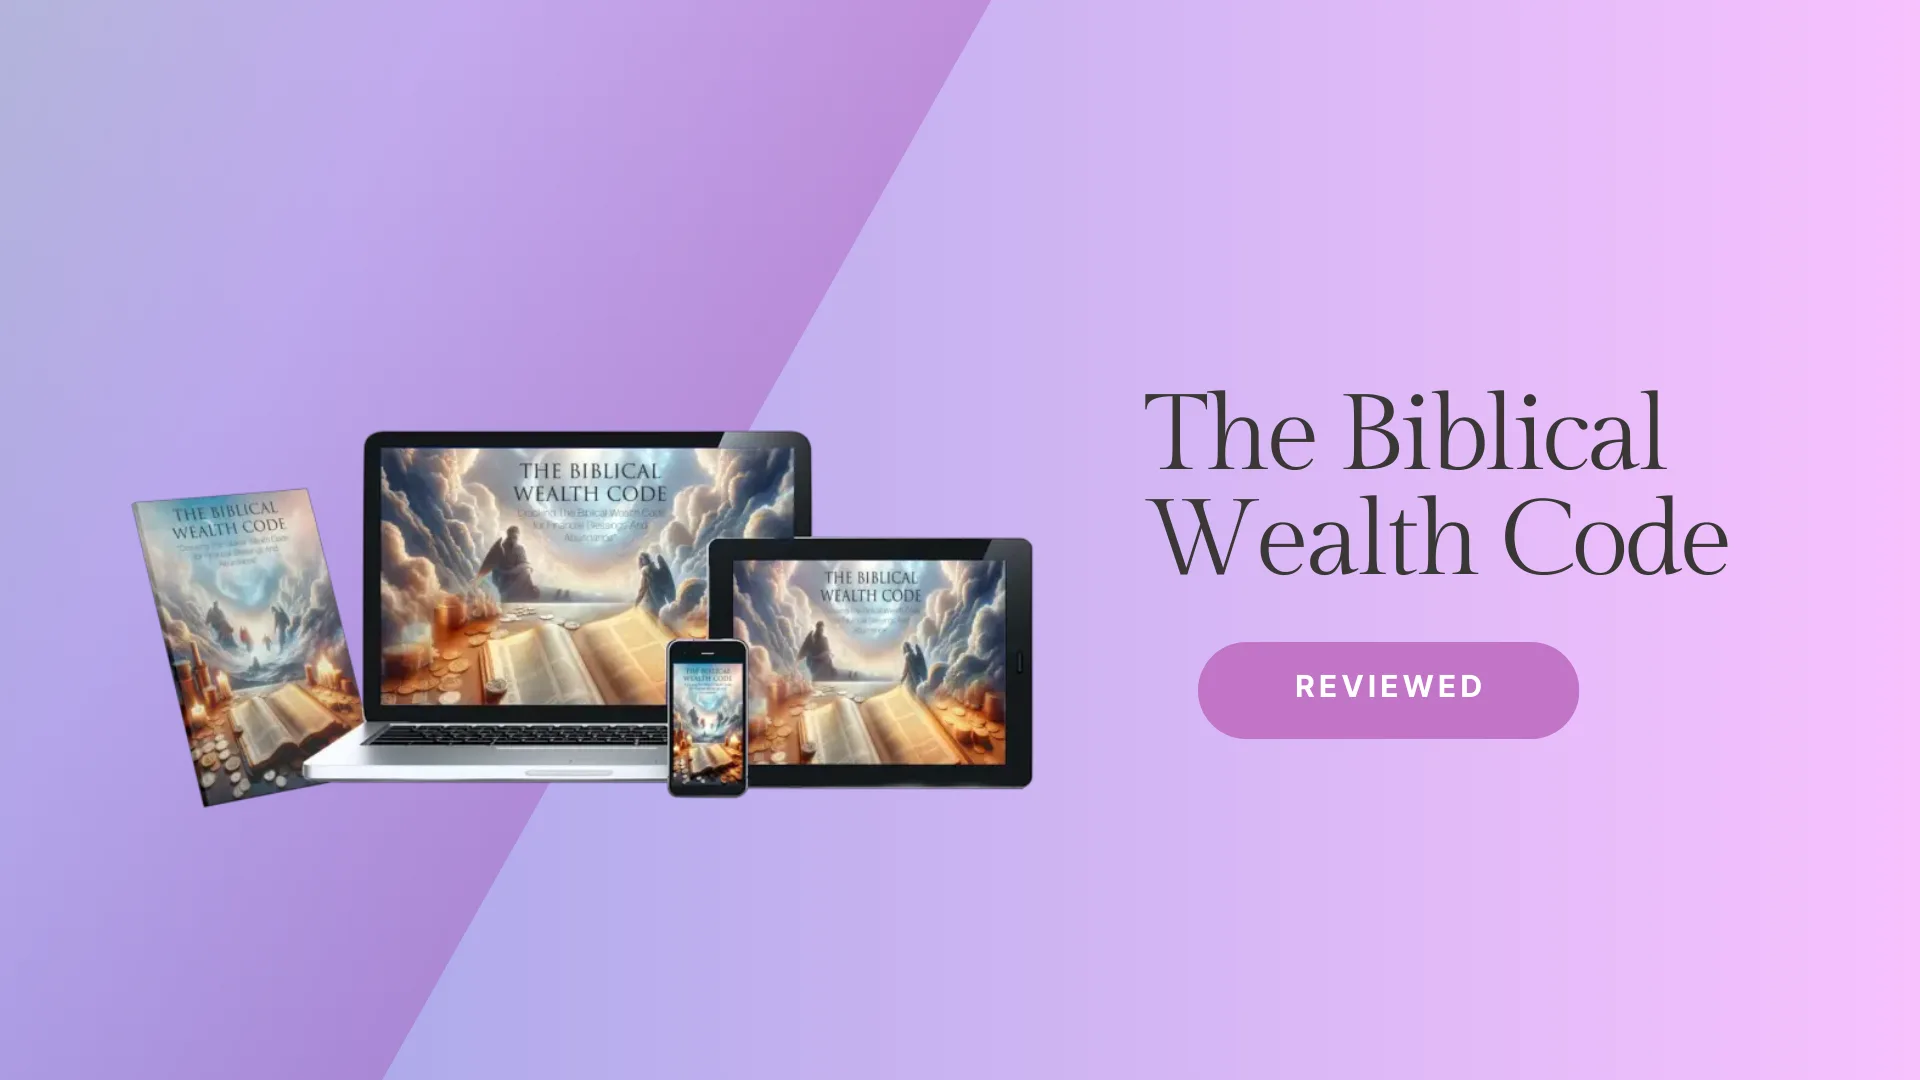 The Biblical Wealth Code Reviews